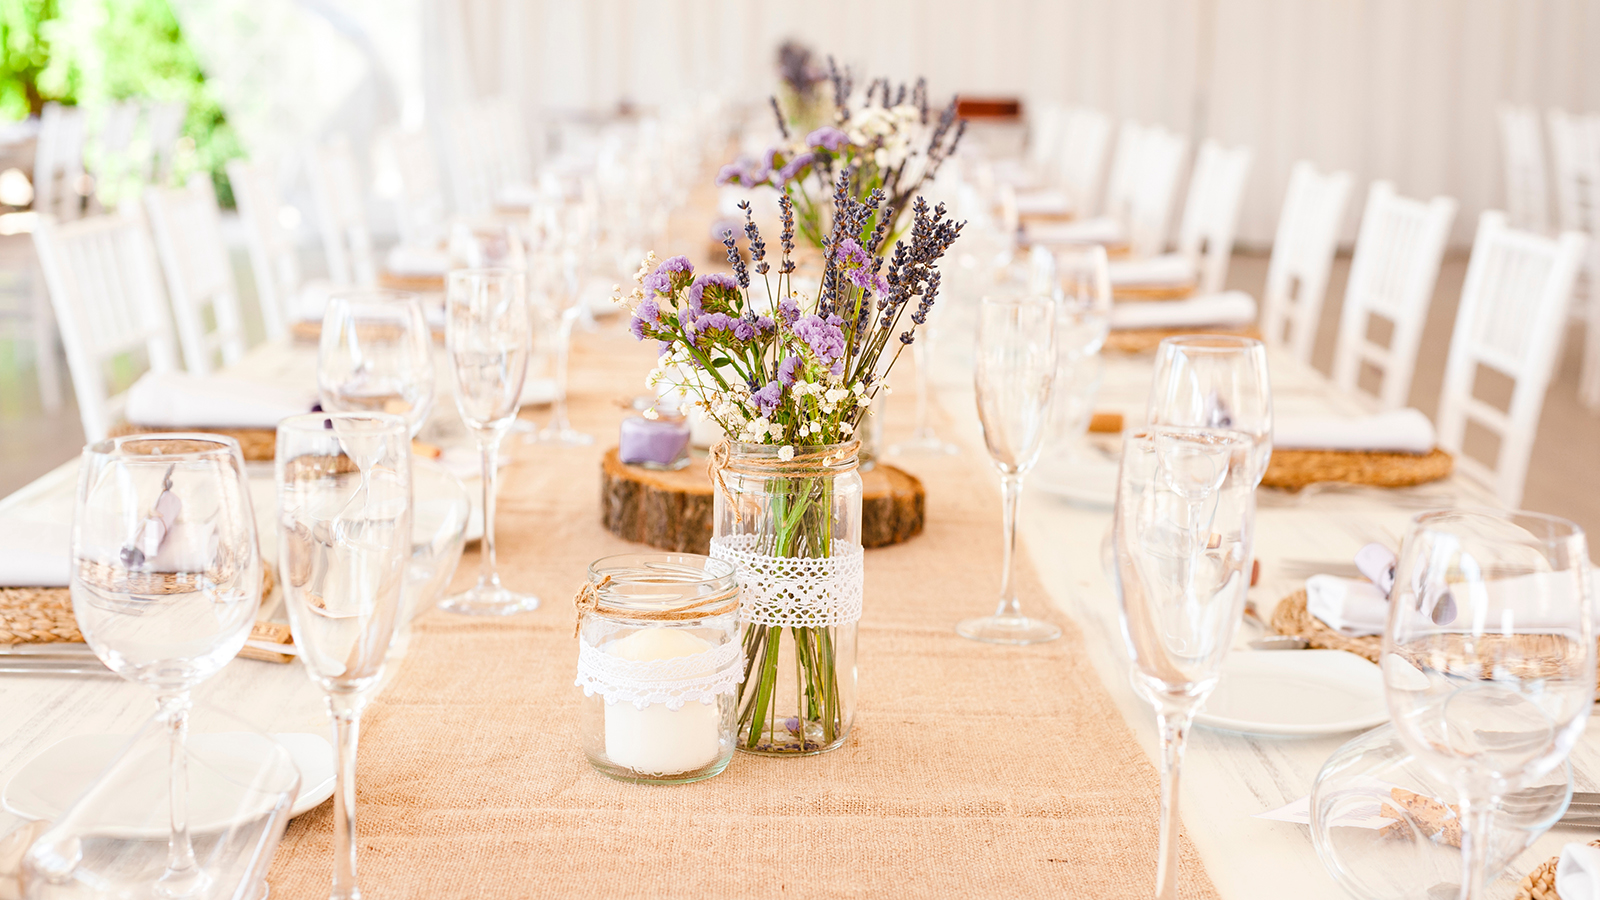 Decorated table with aromatic lavender plants ready for a weddin